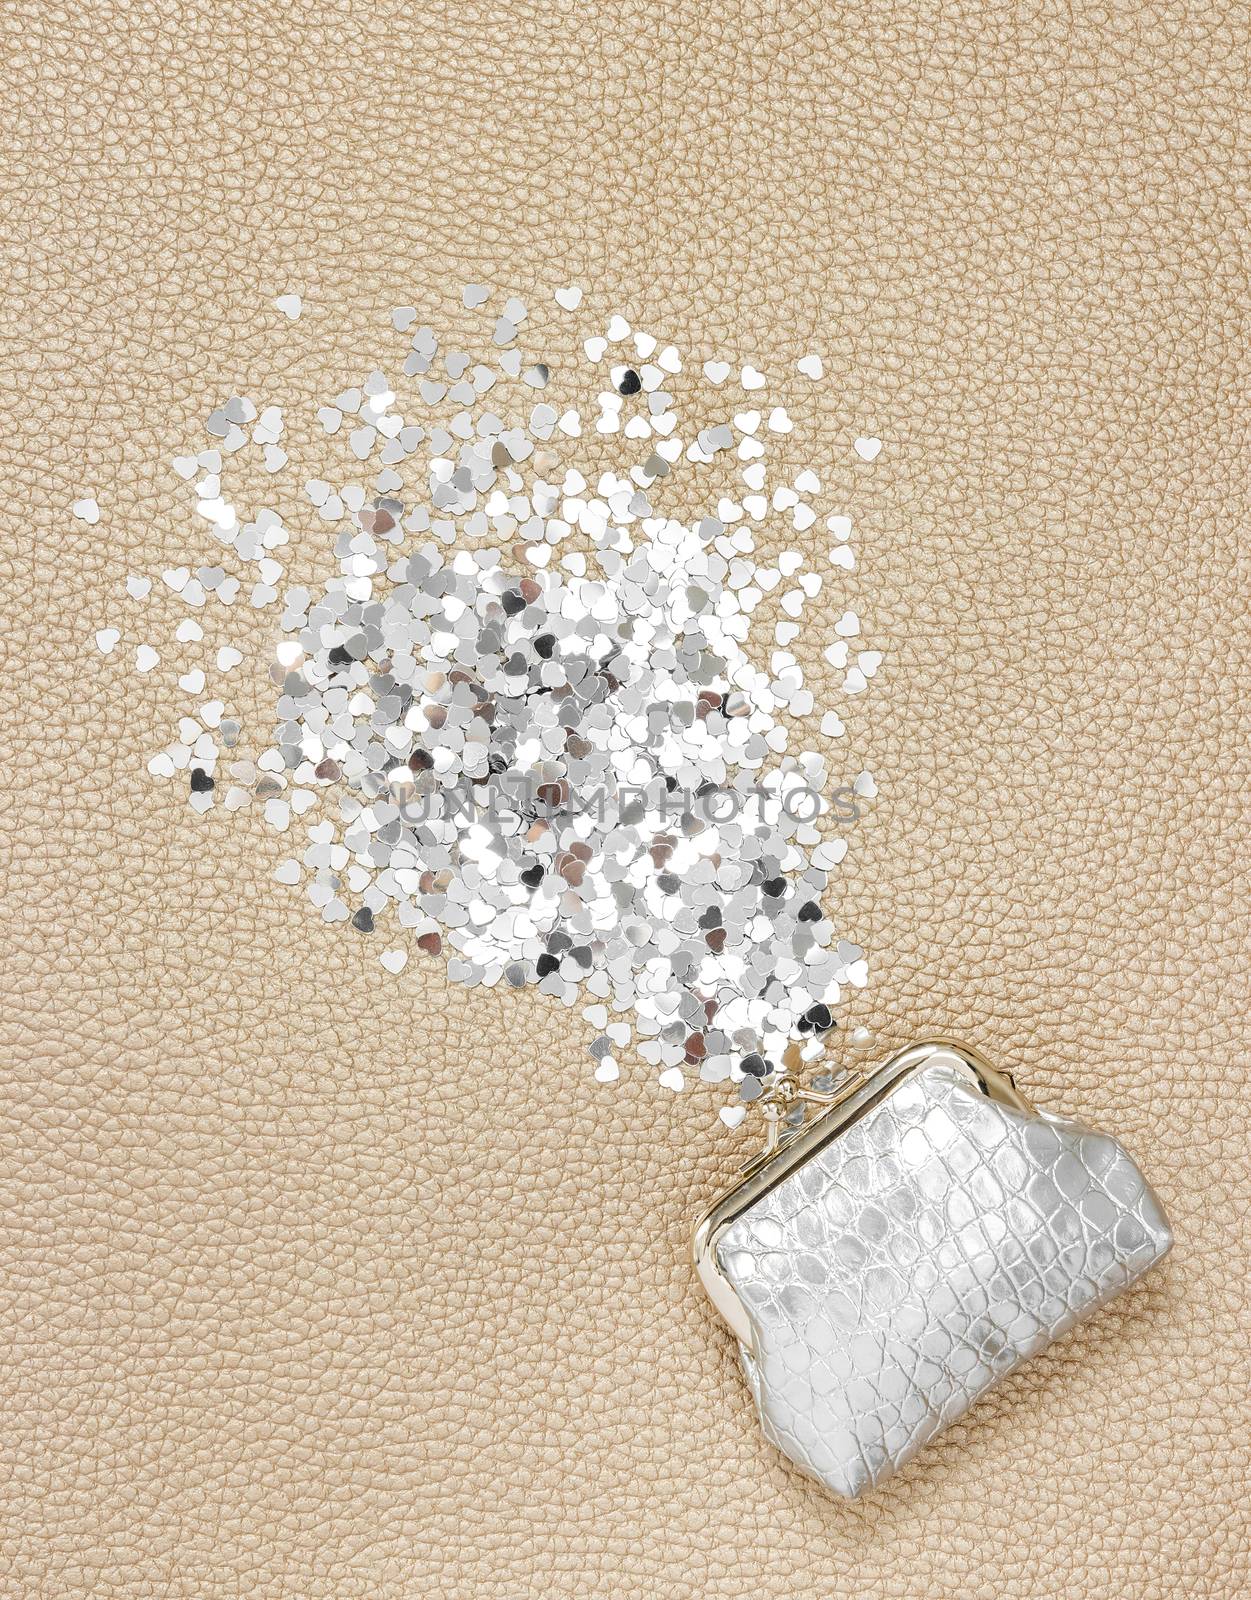 Silver purse and glitter hearts on leather background. Wealth concept.